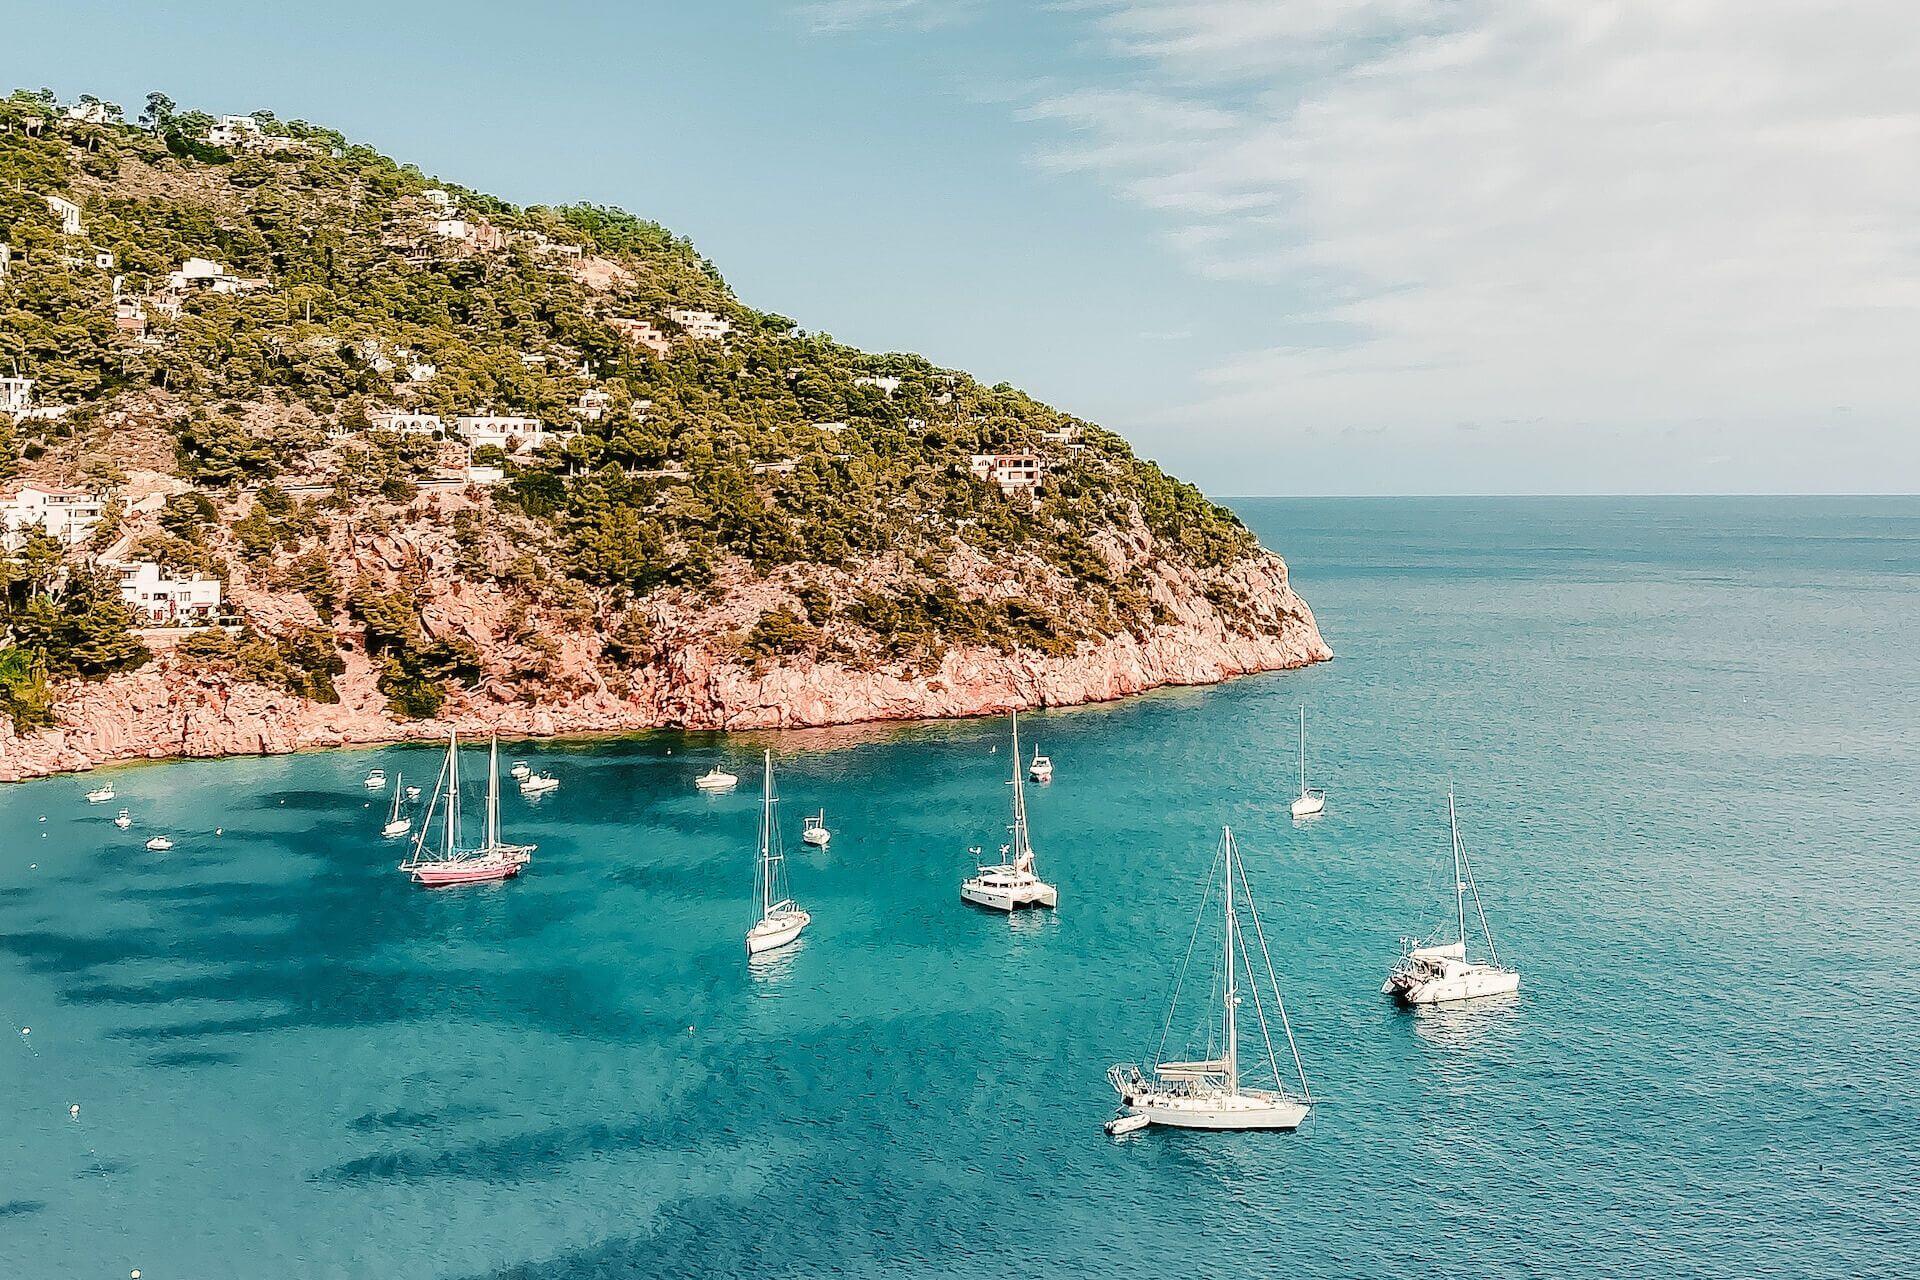 View of boats and yachts at sea and a part of the island of Ibiza